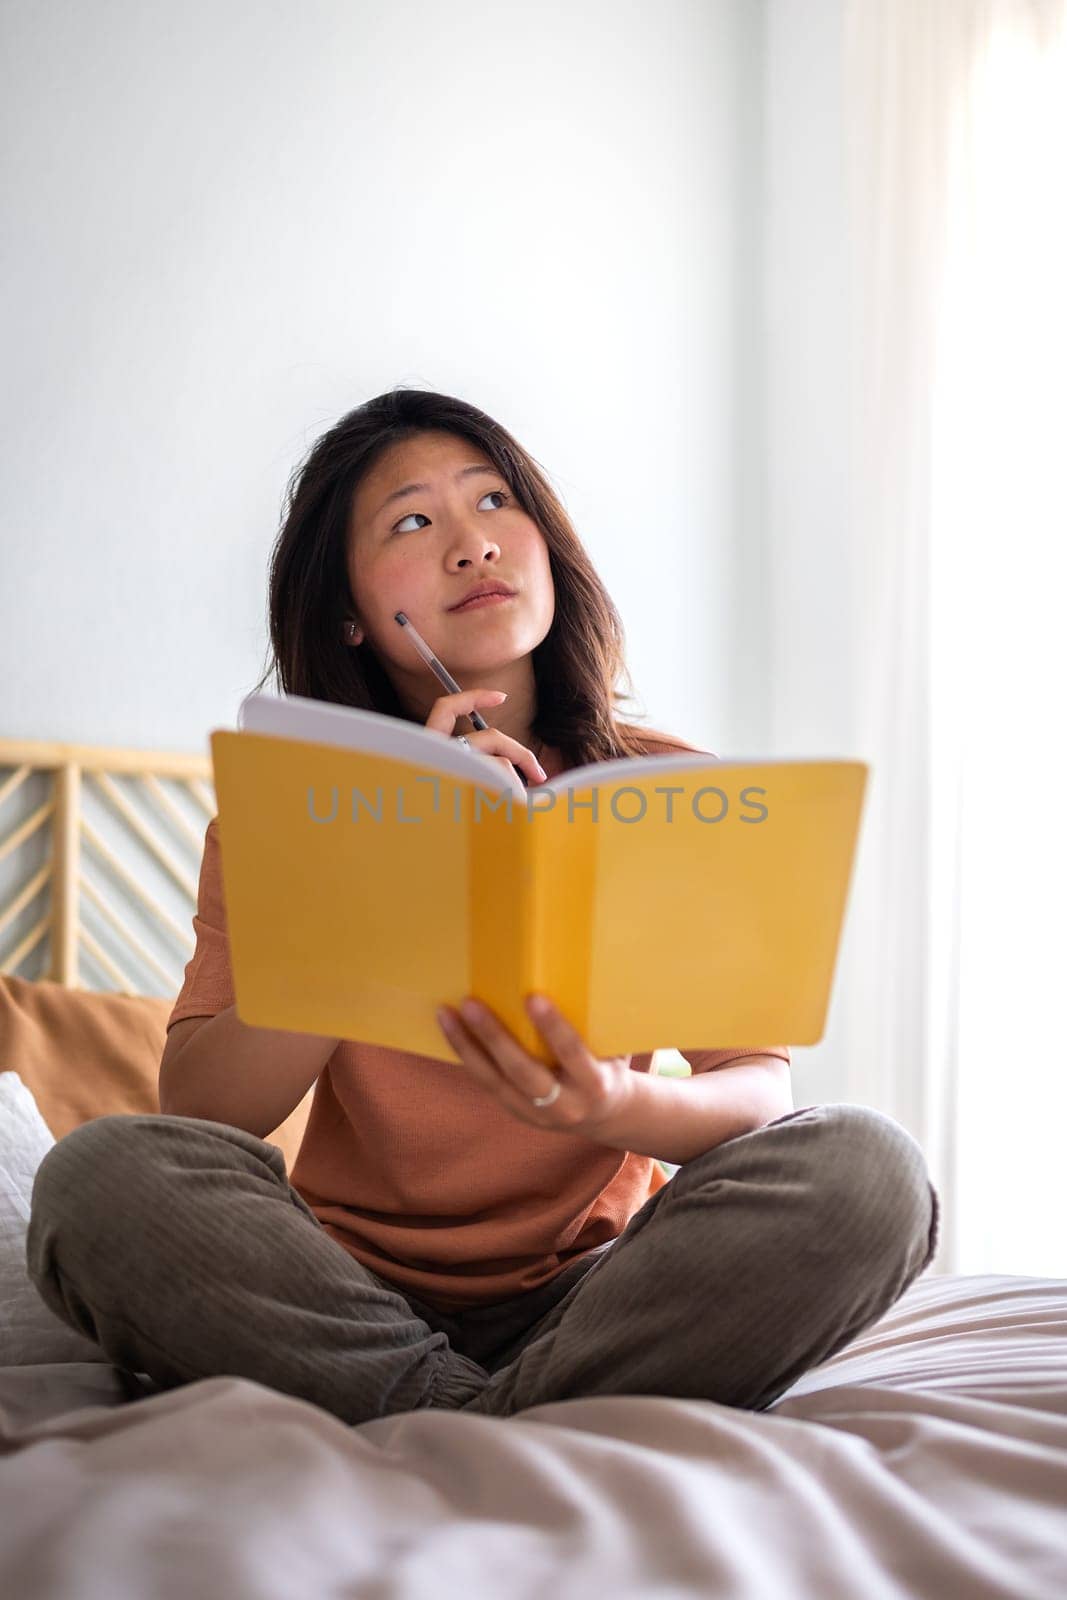 Teen asian girl sitting on bed thinking, using diary and pen to write down thoughts and ideas. Vertical. by Hoverstock